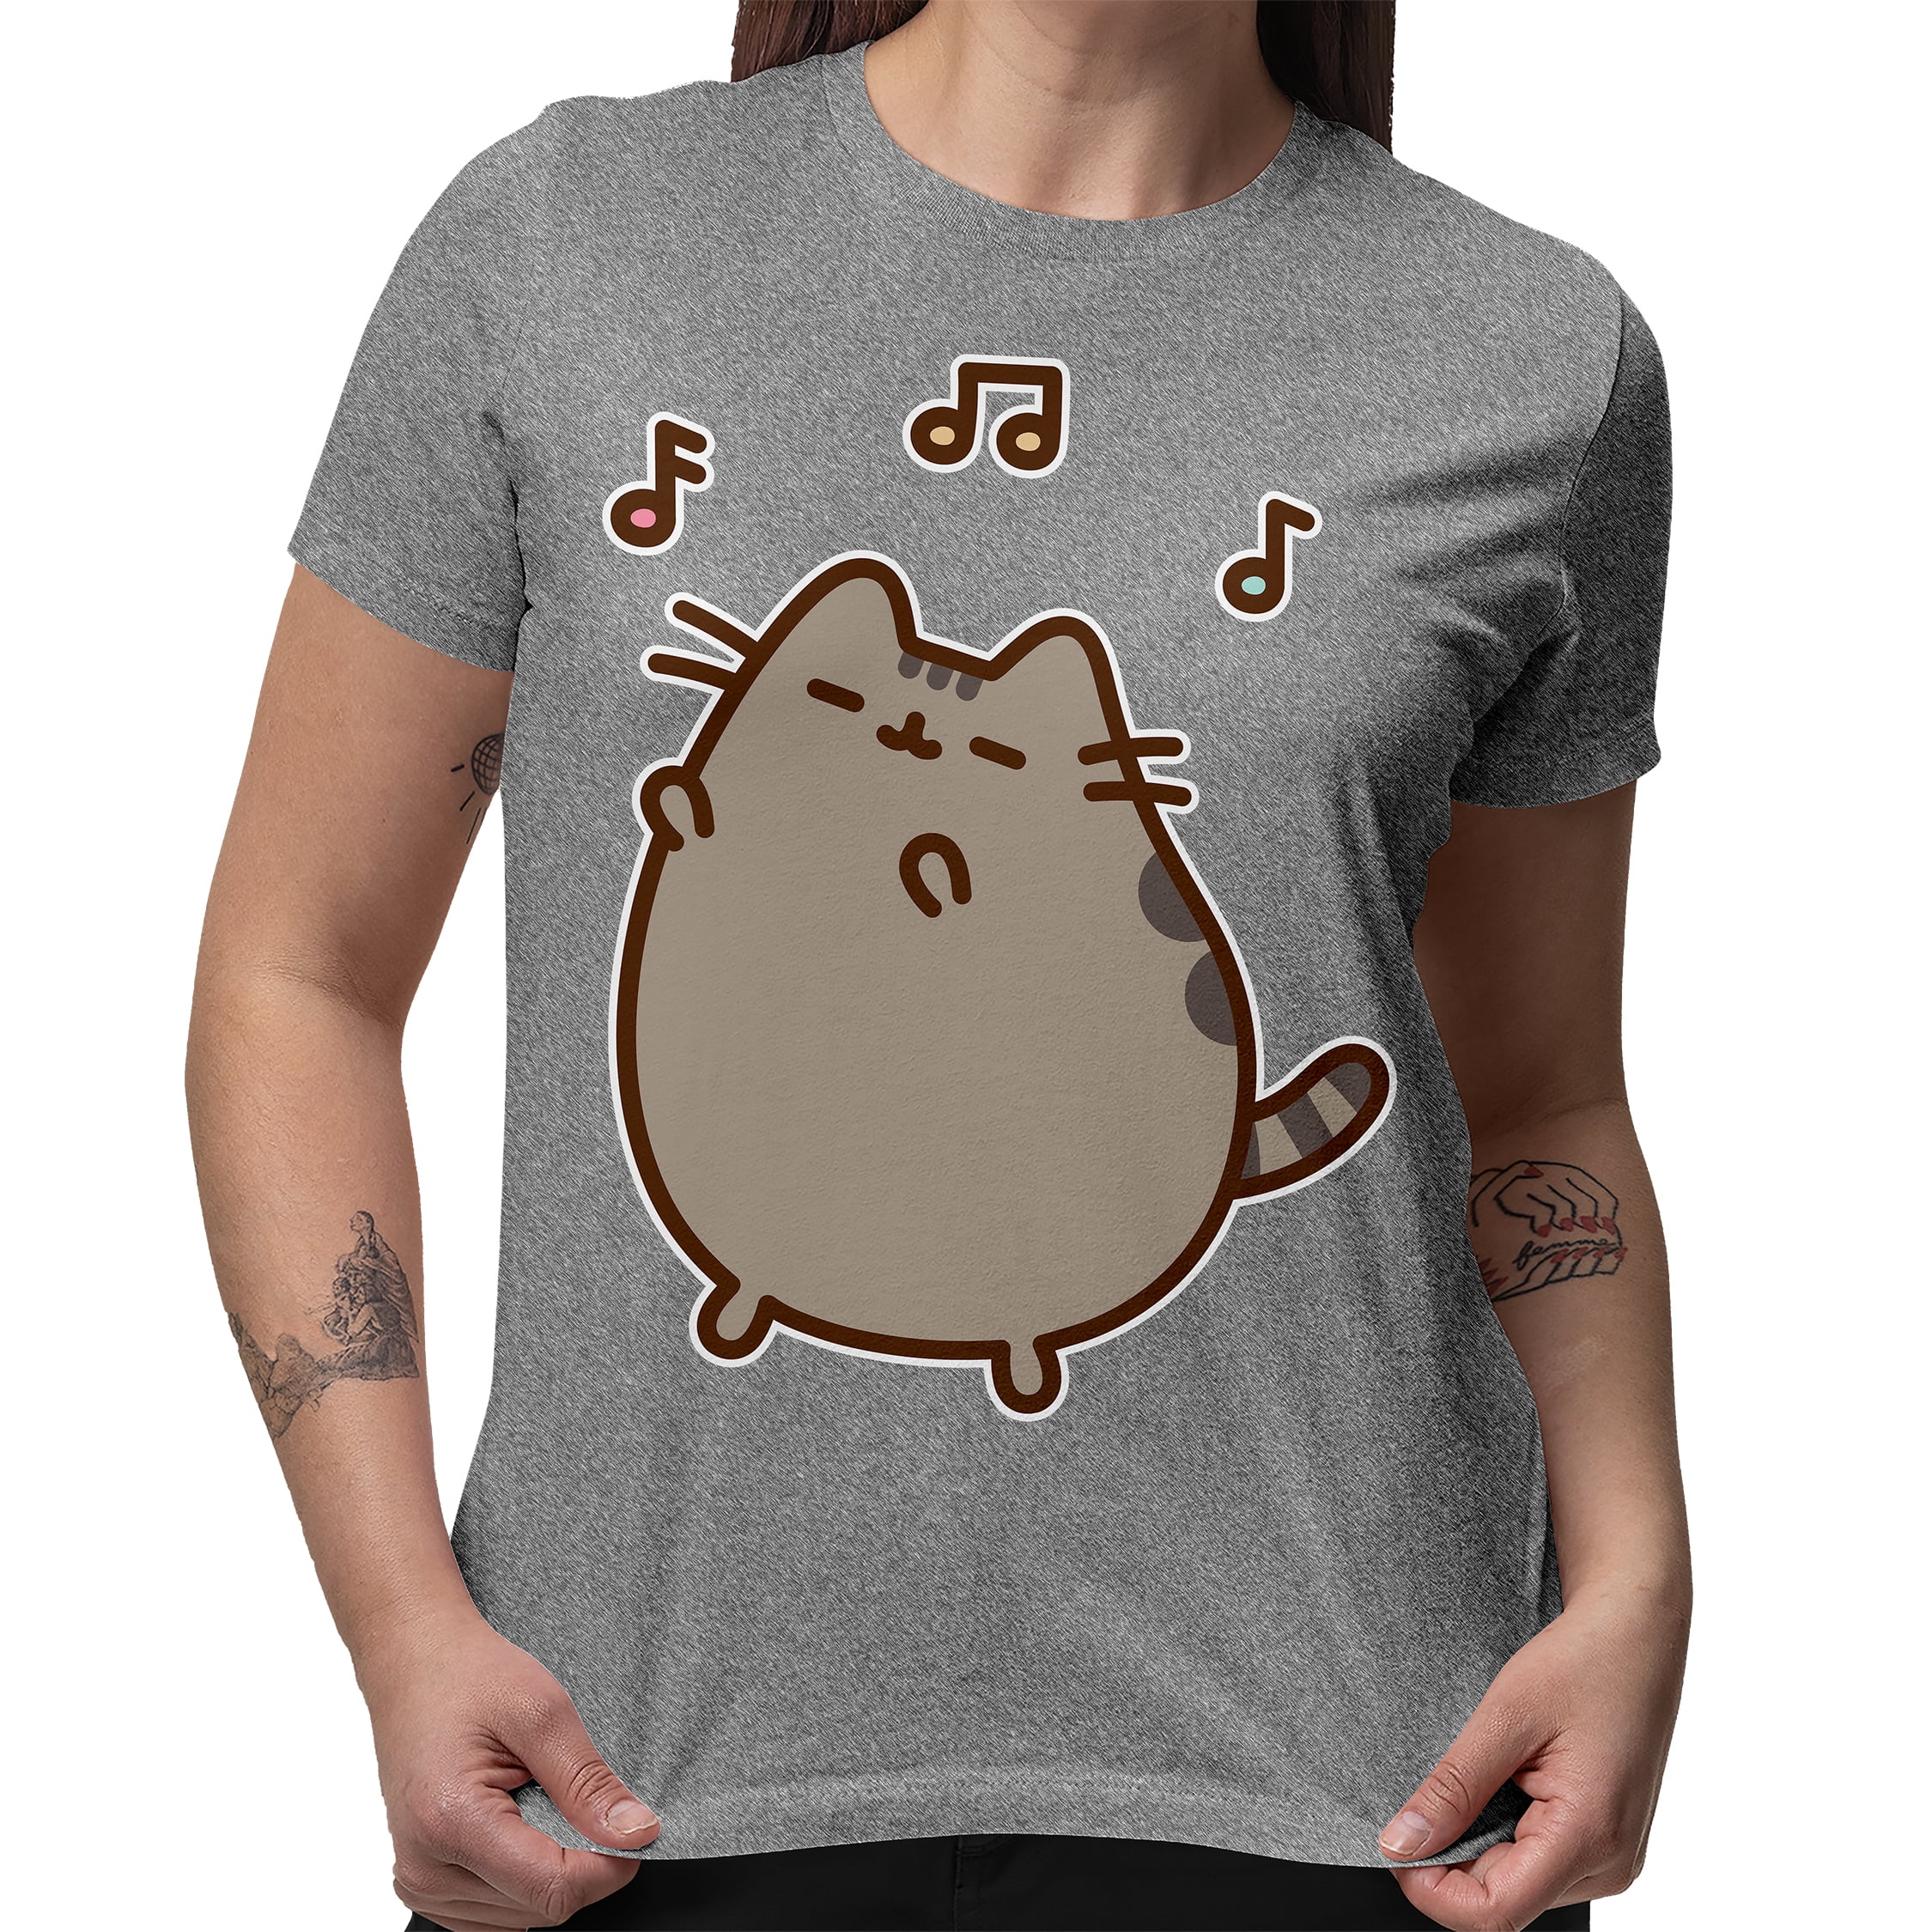 Pusheen The Cat Dance To The Music Mens and Womens Short Sleeve T-Shirt  (Athletic Heather, S-XXL) 